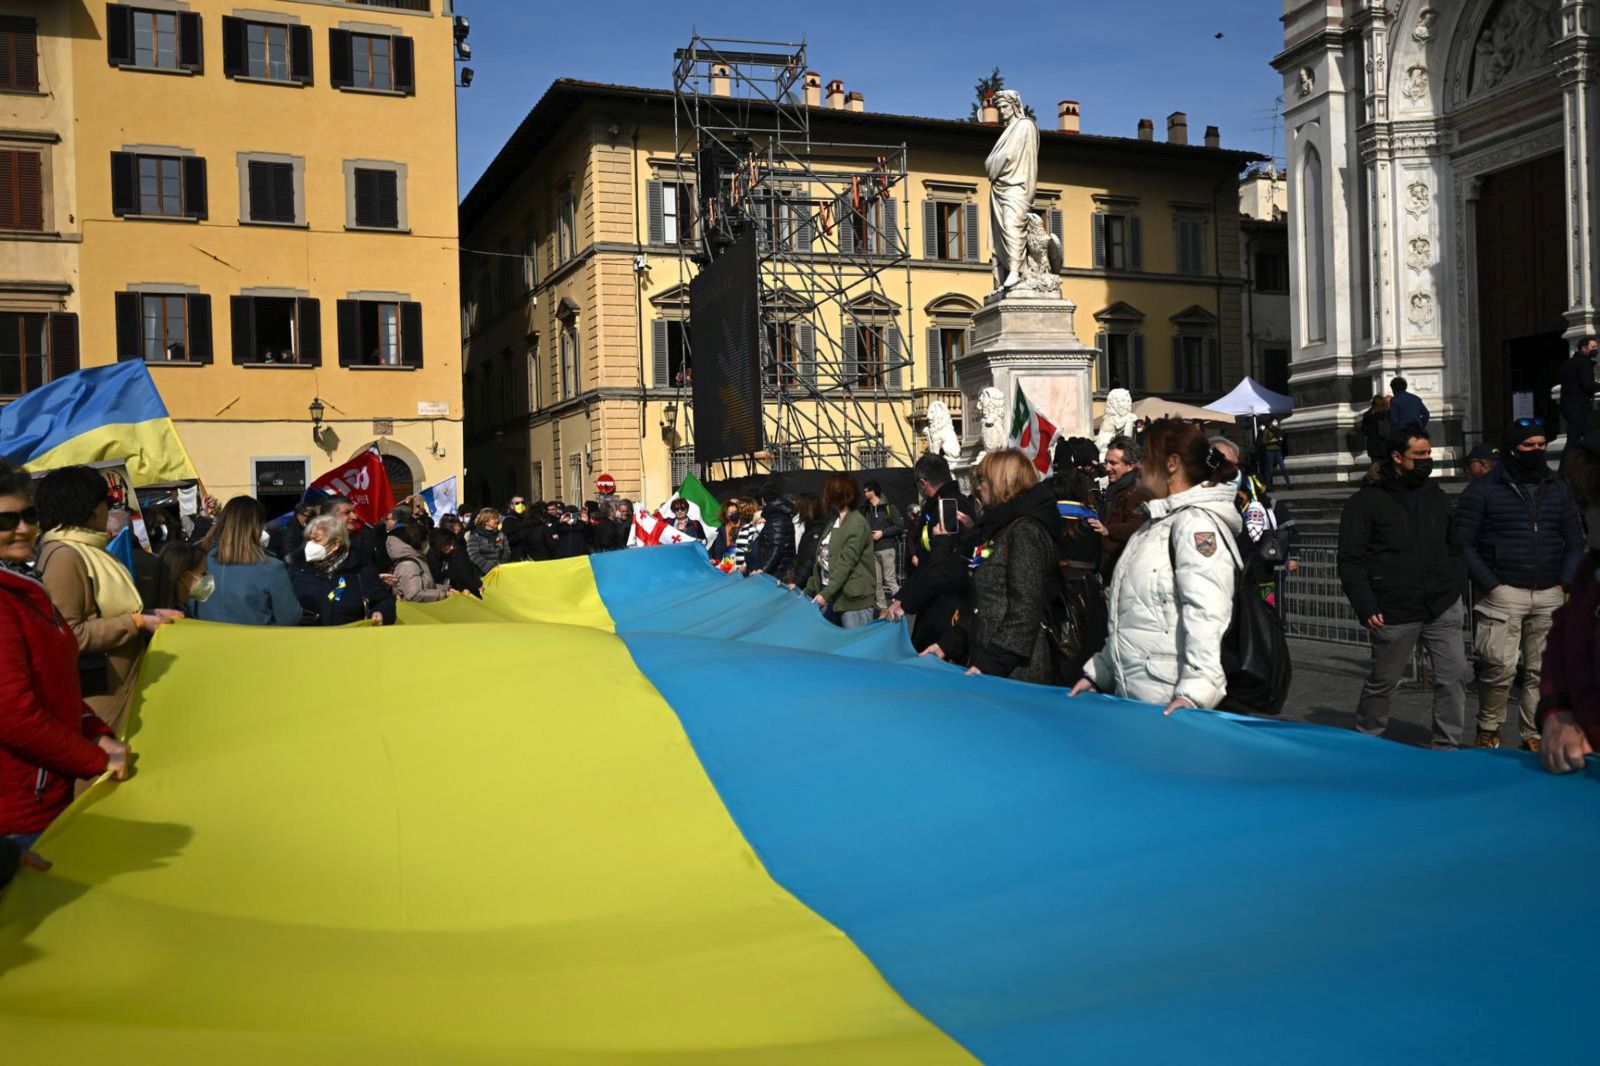 epa09819274 Participants attend the 'Cities Stand With Ukraine' event promoted by European cities belonging to Eurocities to say 'NO to war', in Florence, Italy, 12 March 2022. According to the United Nations refugee agency UNHCR, over 2.5 million people have fled Ukraine since the Russian invasion began on 24 February. Many, however, have decided to stay and fight.  EPA/CLAUDIO GIOVANNINI